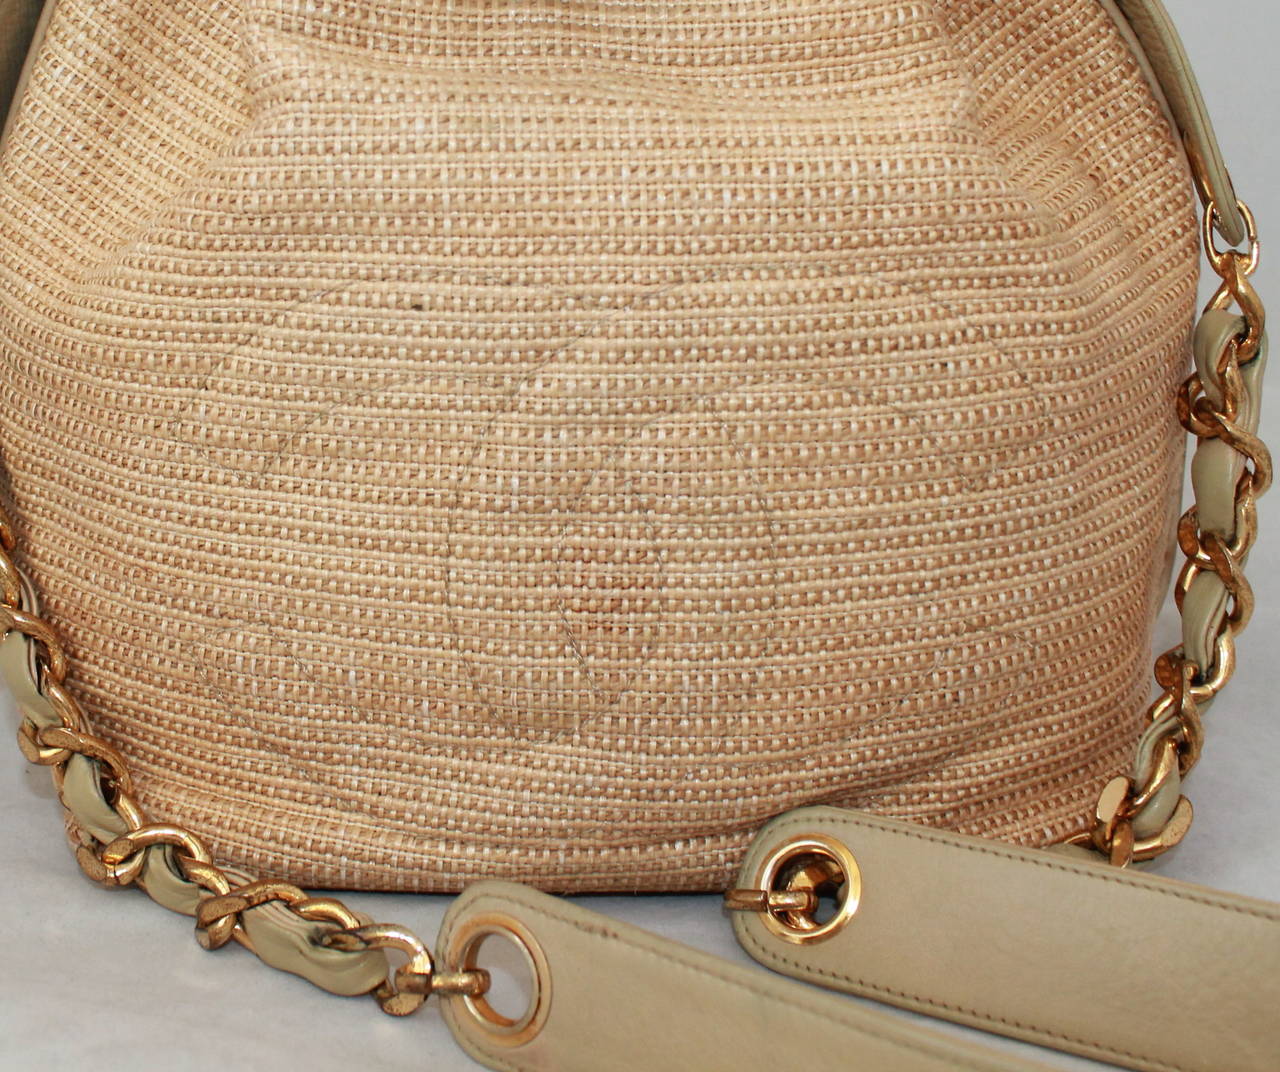 Chanel Early 1980's Vintage Raffia & Beige Leather Crossbody Bag. This bag is in good vintage condition with the raffia showing very minimal use but the inside displaying signs of use. It comes with a smaller case inside. 

Measurements:
Length-